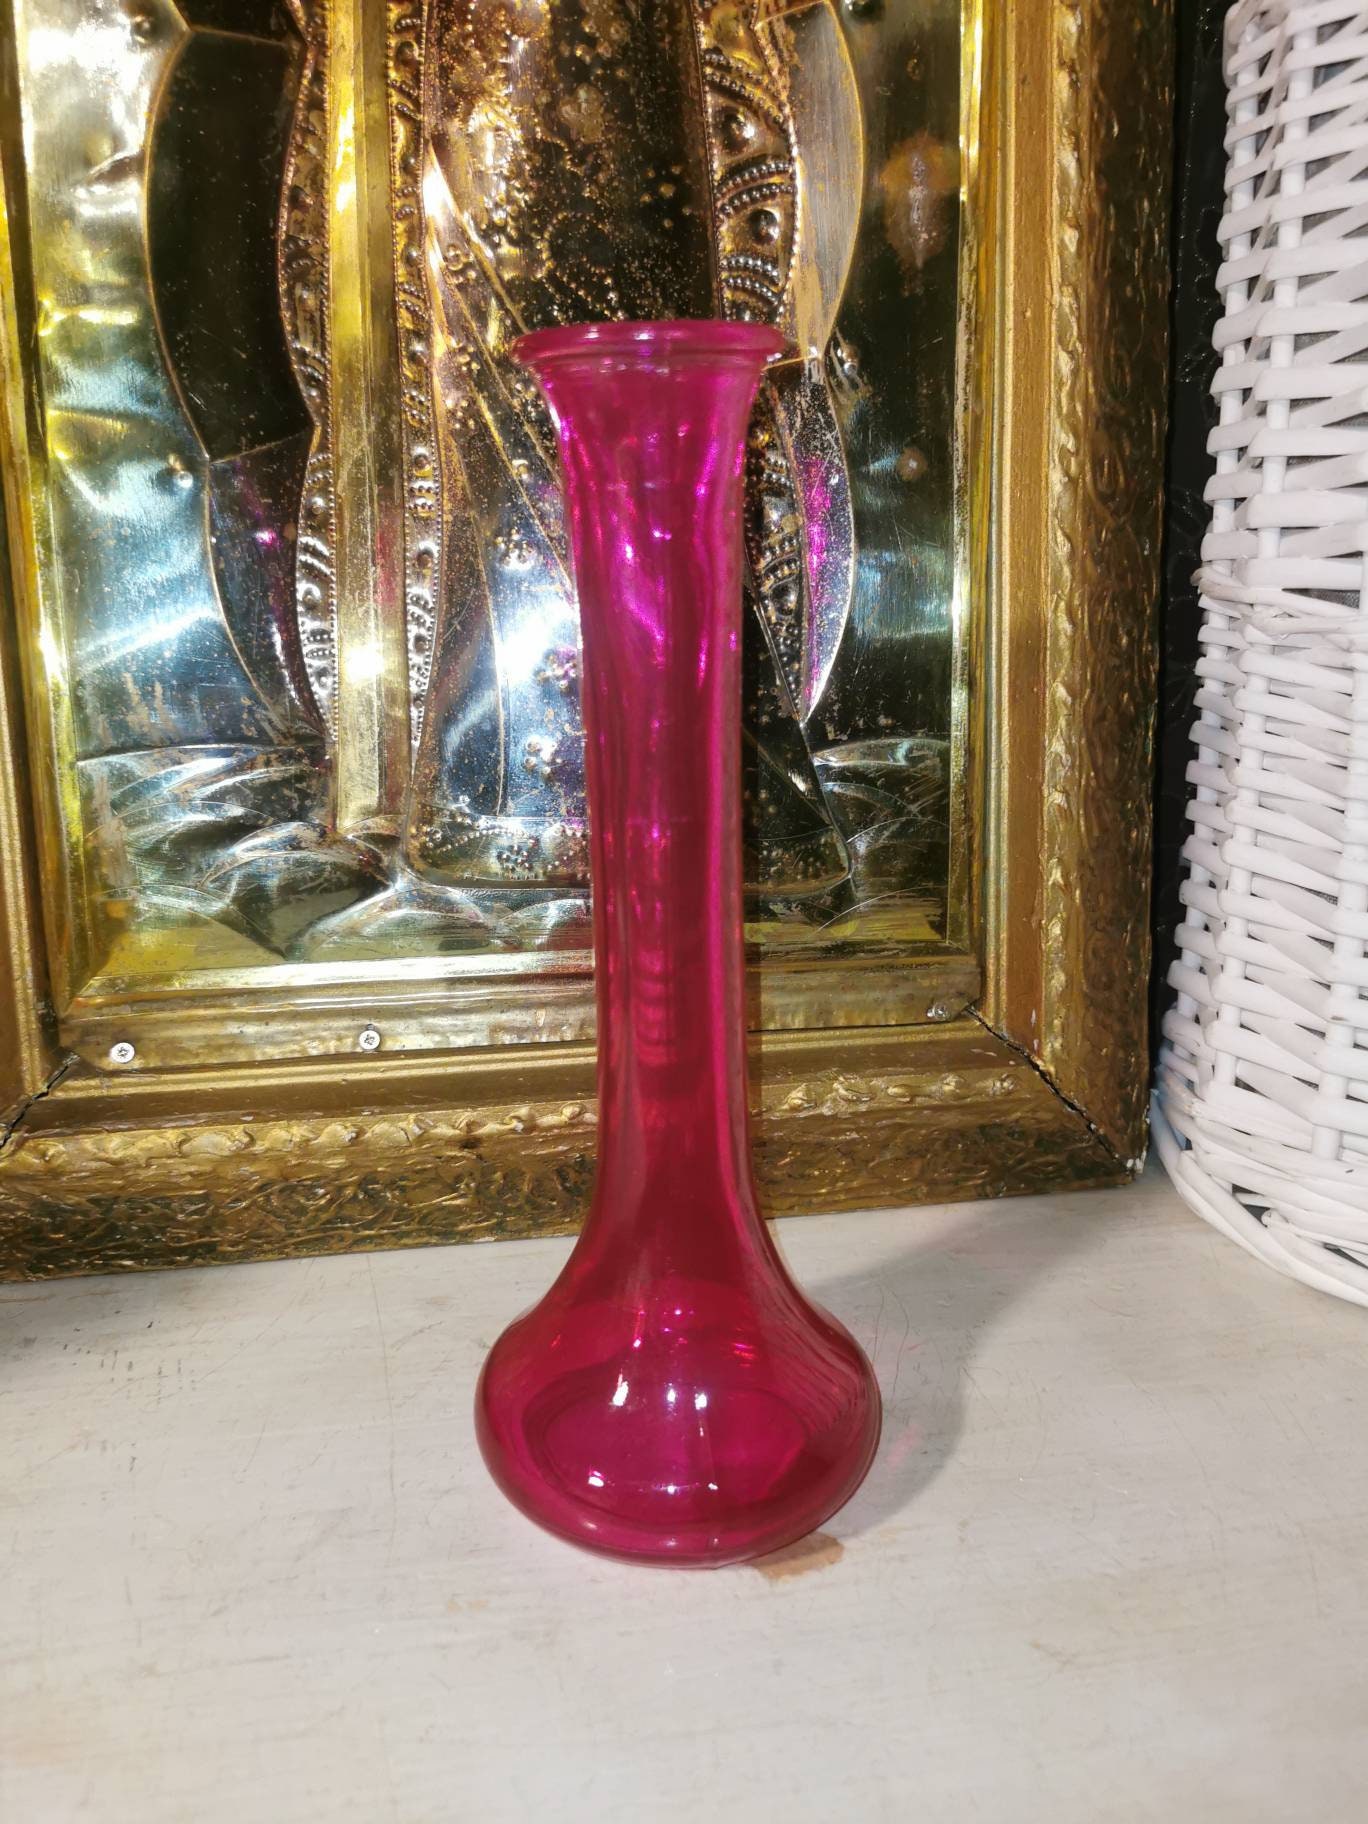 Old Fashioned Glass Sipper Milk Bottles w/Lids & Reusable Color Twist –  Aura In Pink Inc.